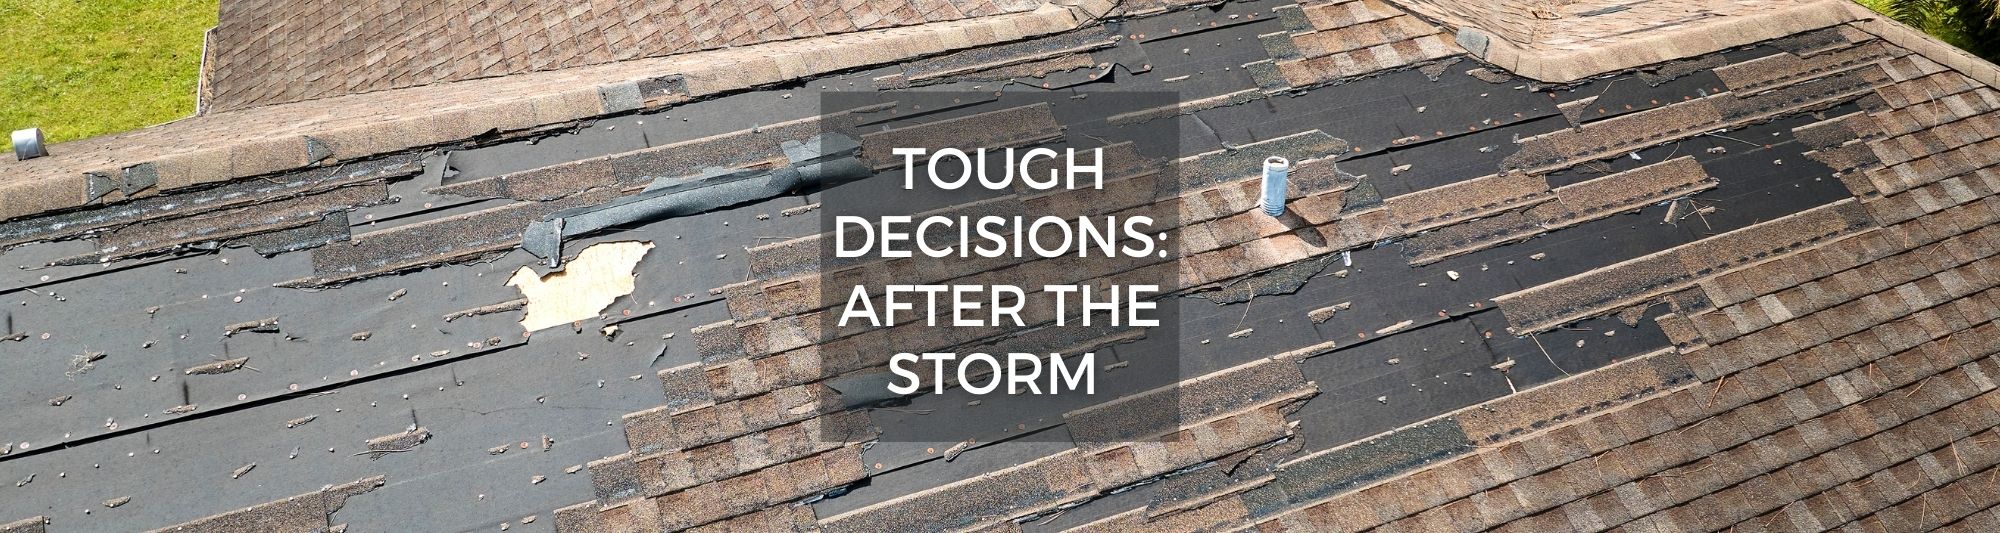 Photo of damaged roof after a storm hit the home with text saying "Tough Decisions: After the Storm"